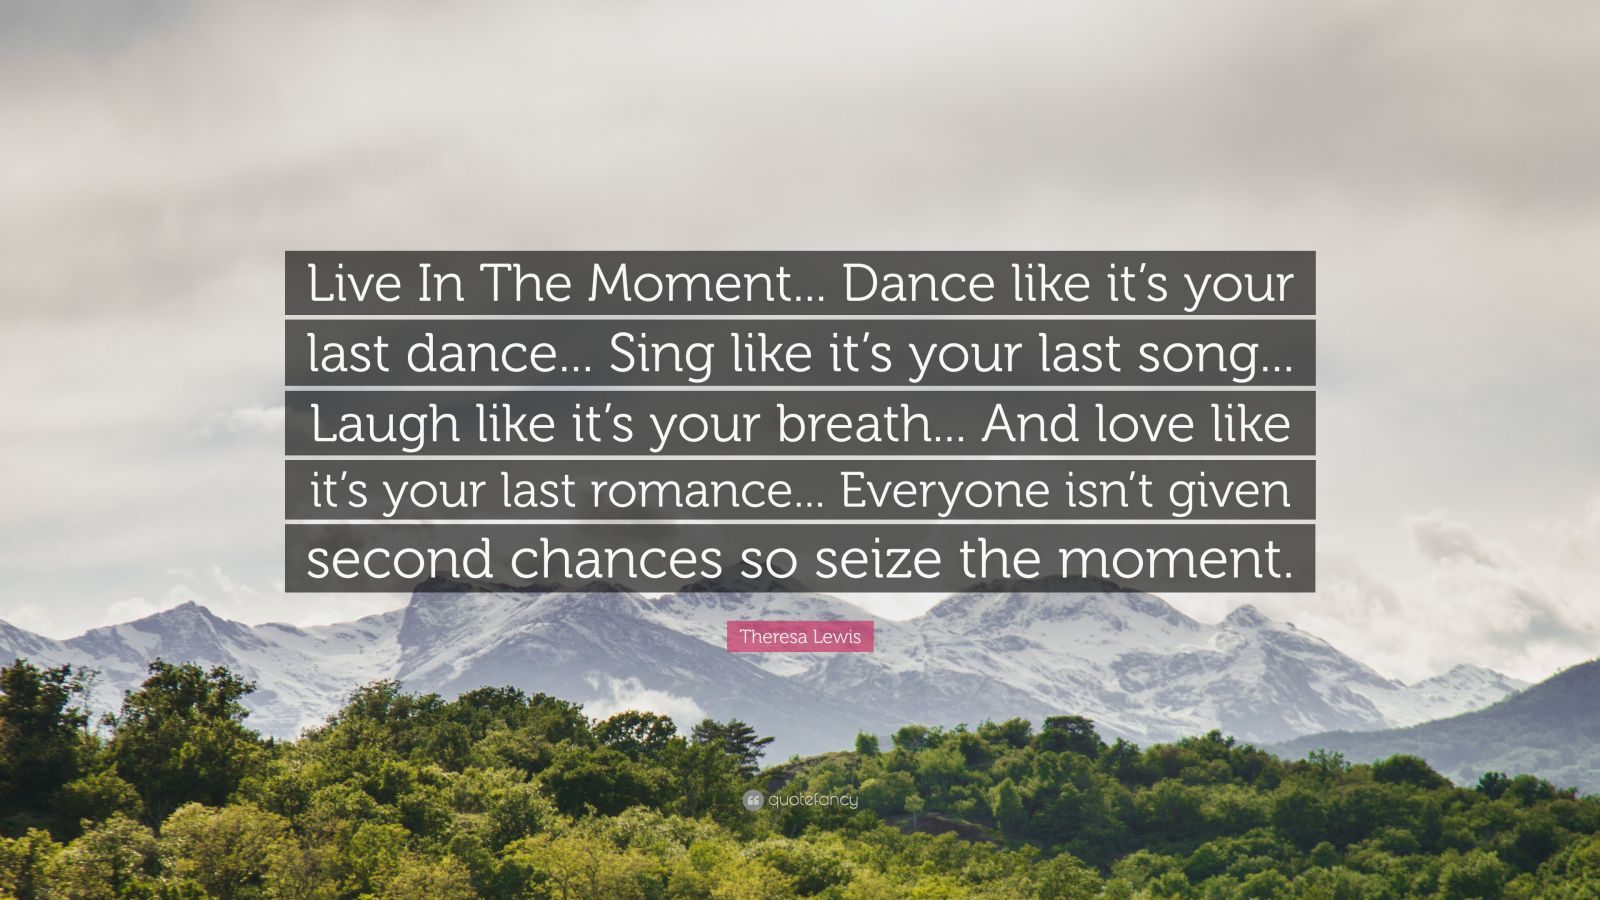 Our Last Dance  Quotes to live by, Words, Quotes